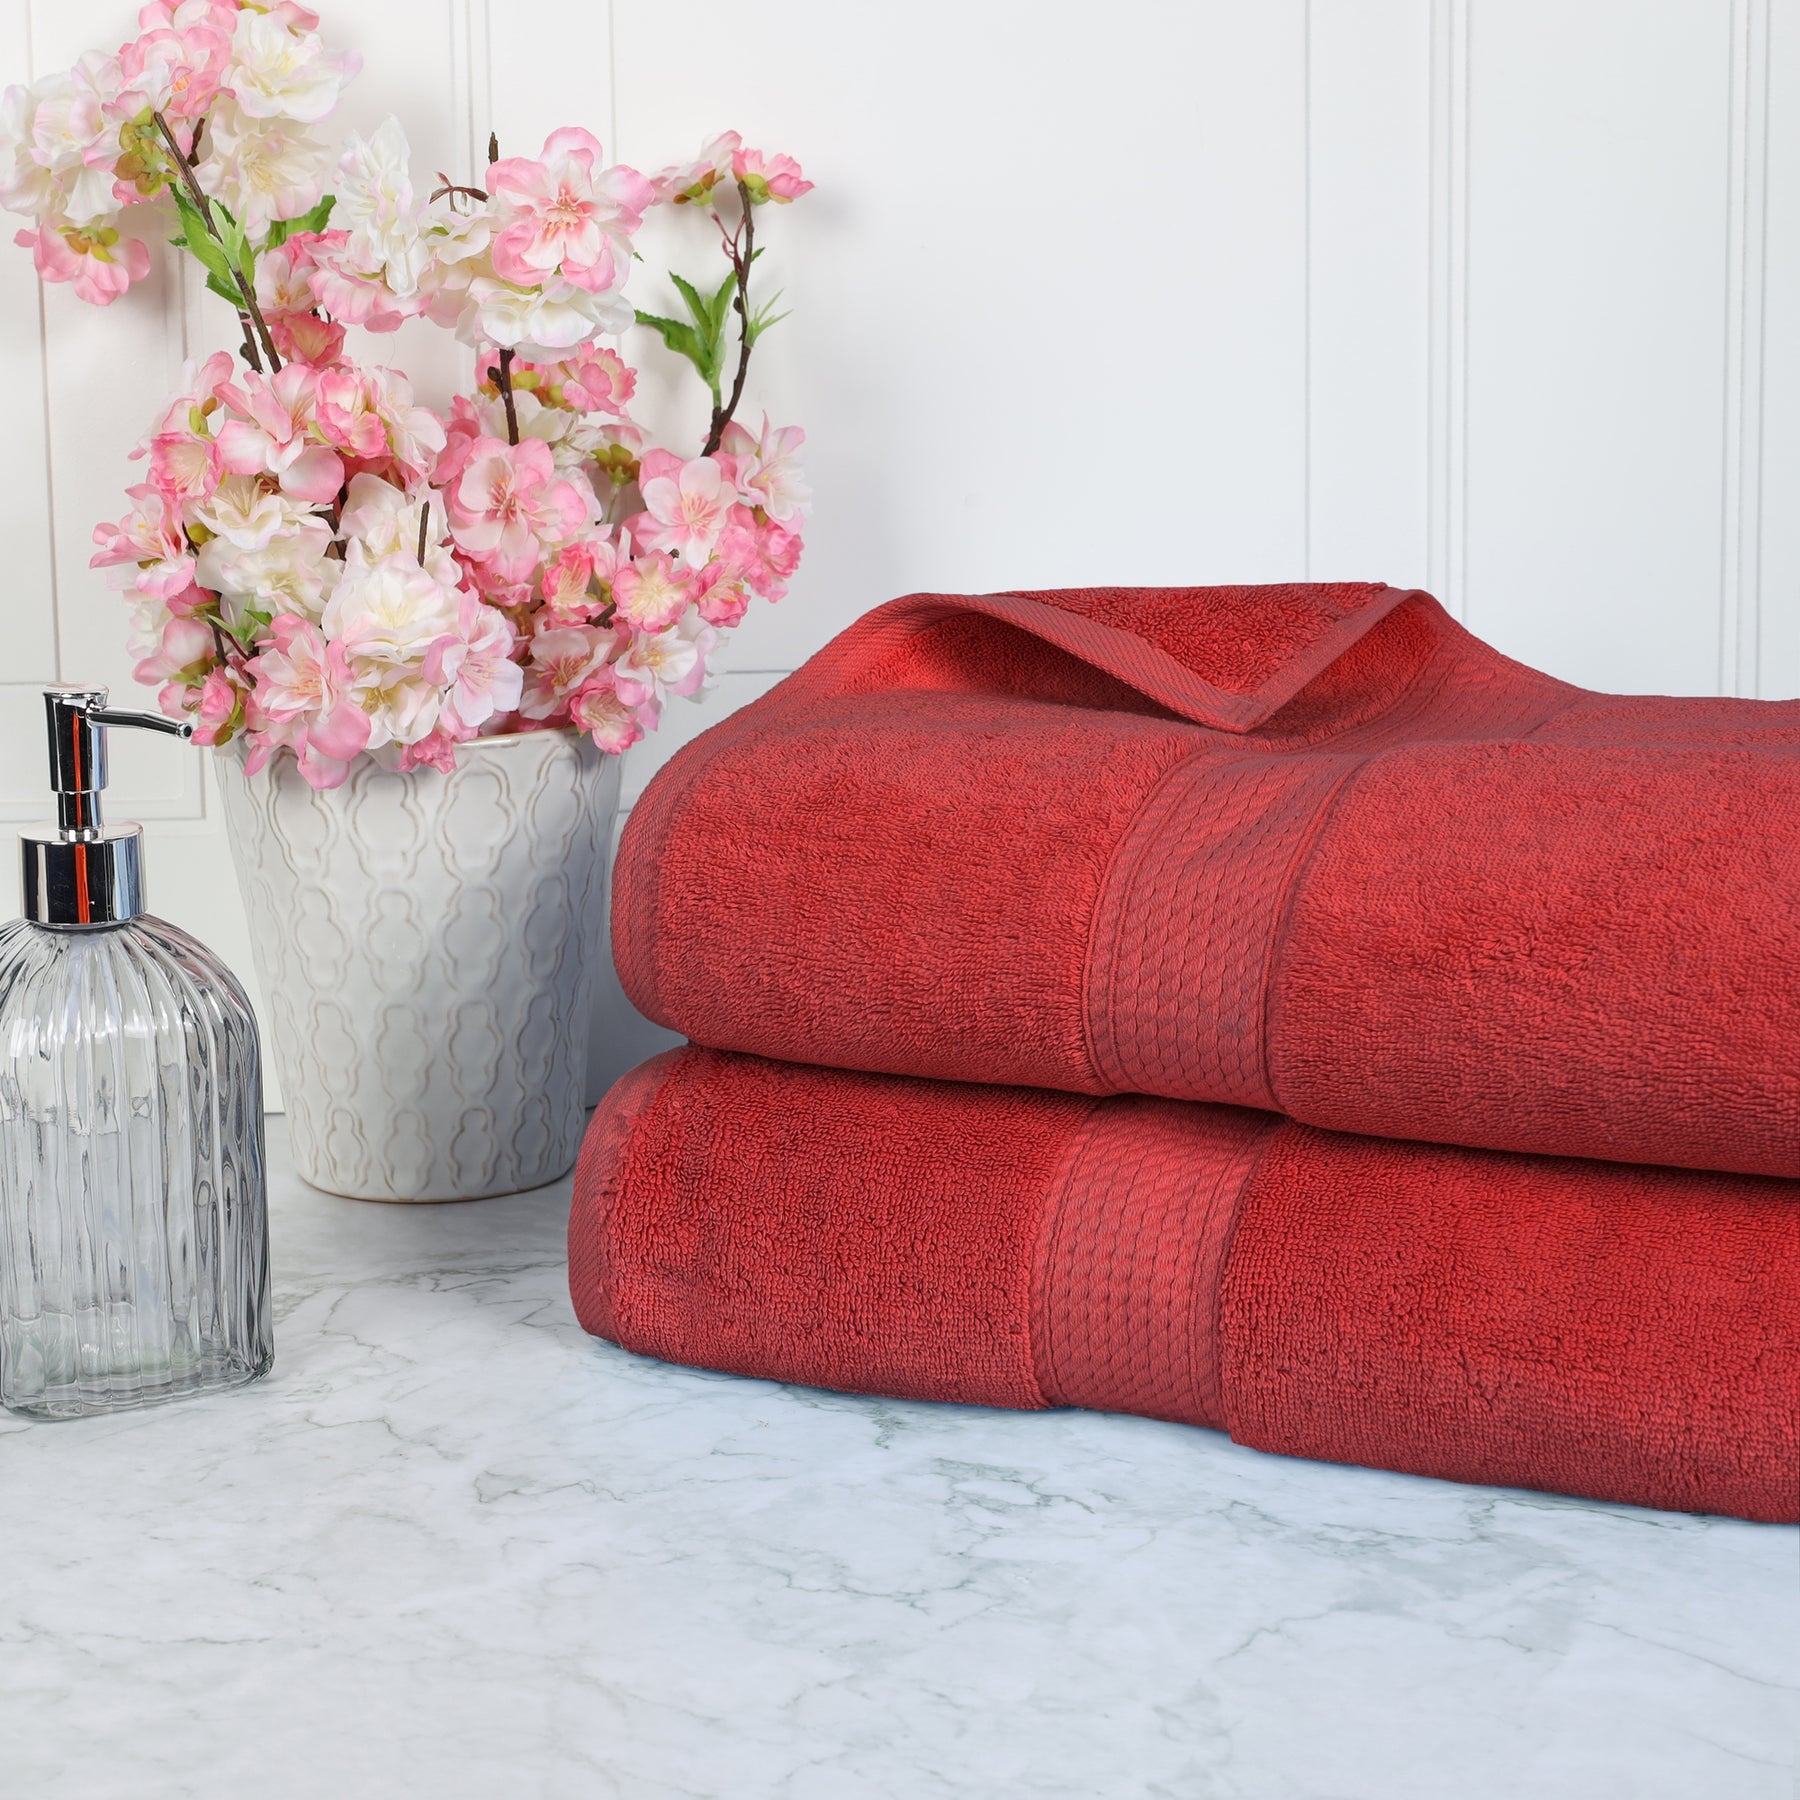 Egyptian Cotton Highly Absorbent 2 Piece Ultra-Plush Solid Bath Sheet Set - Red